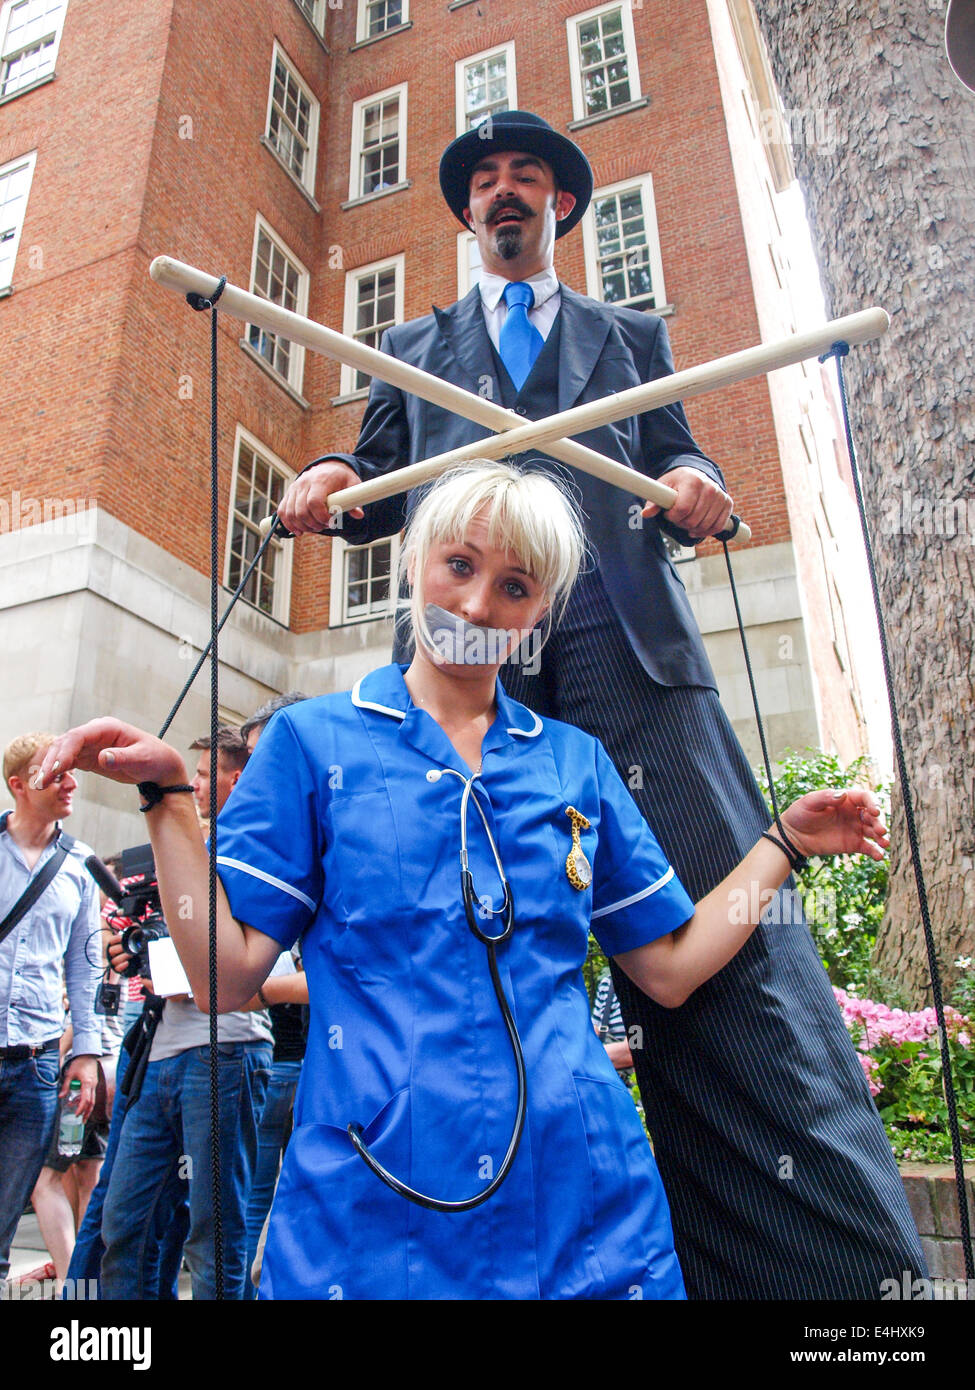 London, UK. 12th July, 2014.  A puppet master on stilts pulls the strings of a human NHS nurse who is gagged with tape, during the anti-Transatlantic Trade and Investment Partnership (TTIP) protest in Smith Square. Credit:  Mamusu Kallon/Alamy Live News Stock Photo